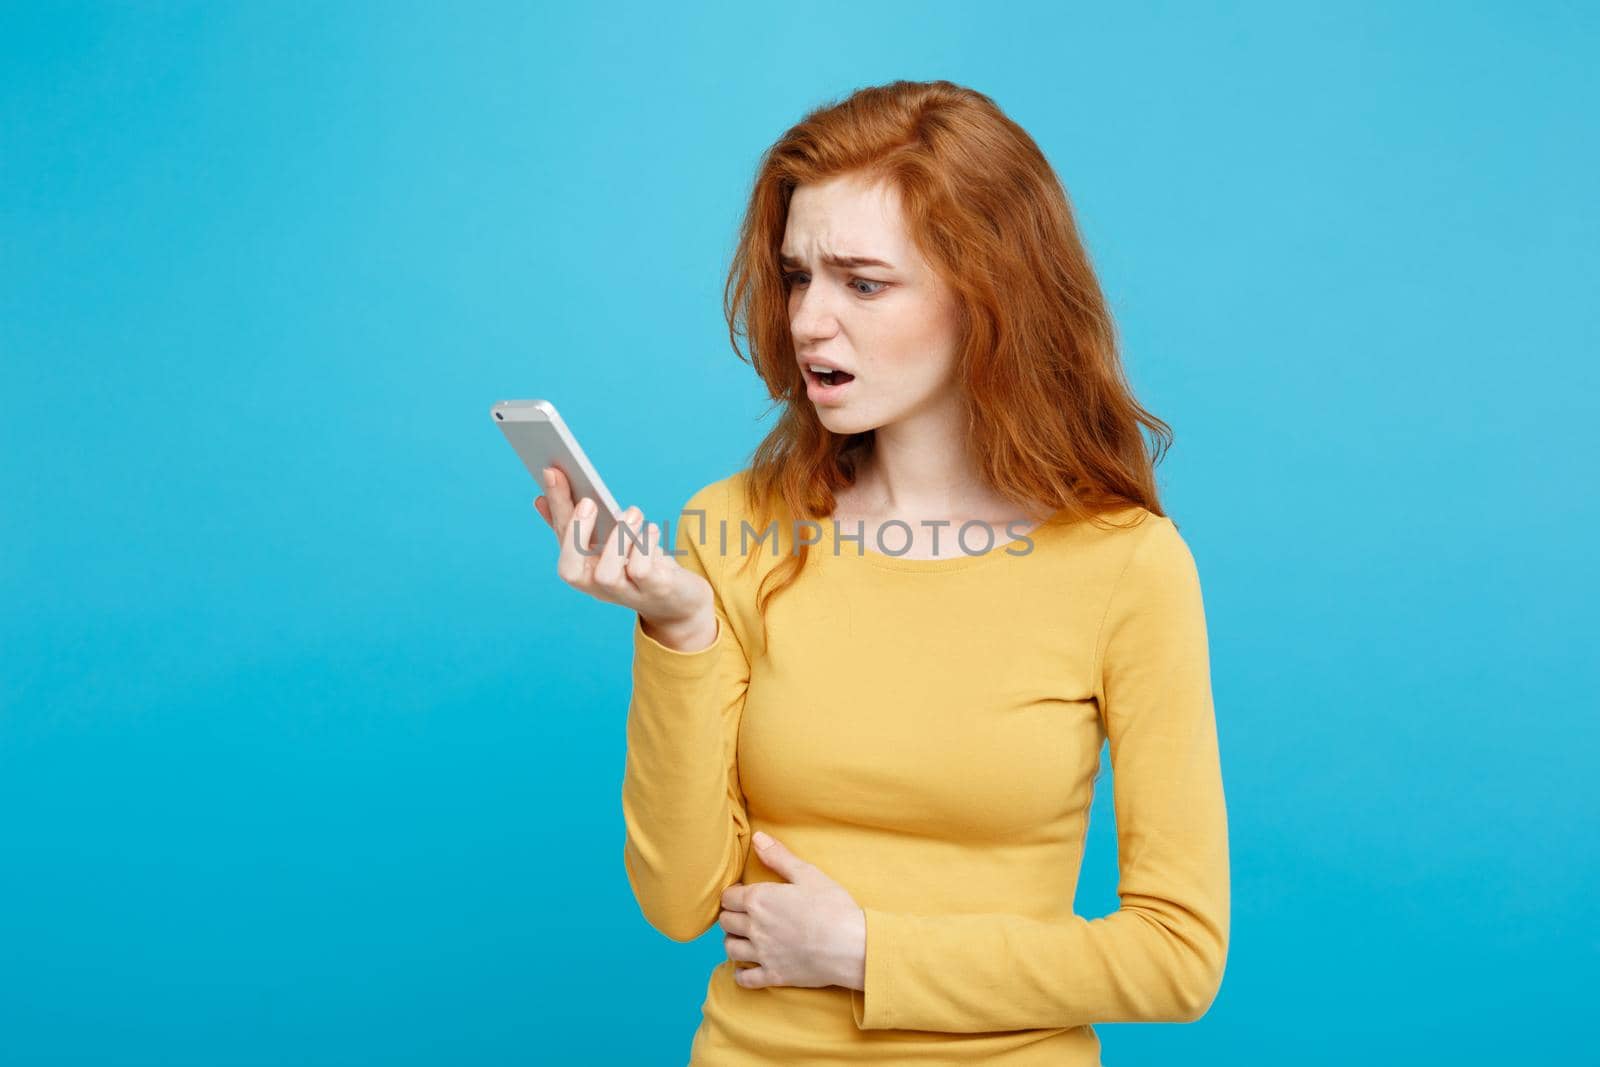 Lifestyle concept - Portrait of a shocked surprised girl in yellow dress talking on mobile phone. Isolated on Blue Pastel Background. Copy space.